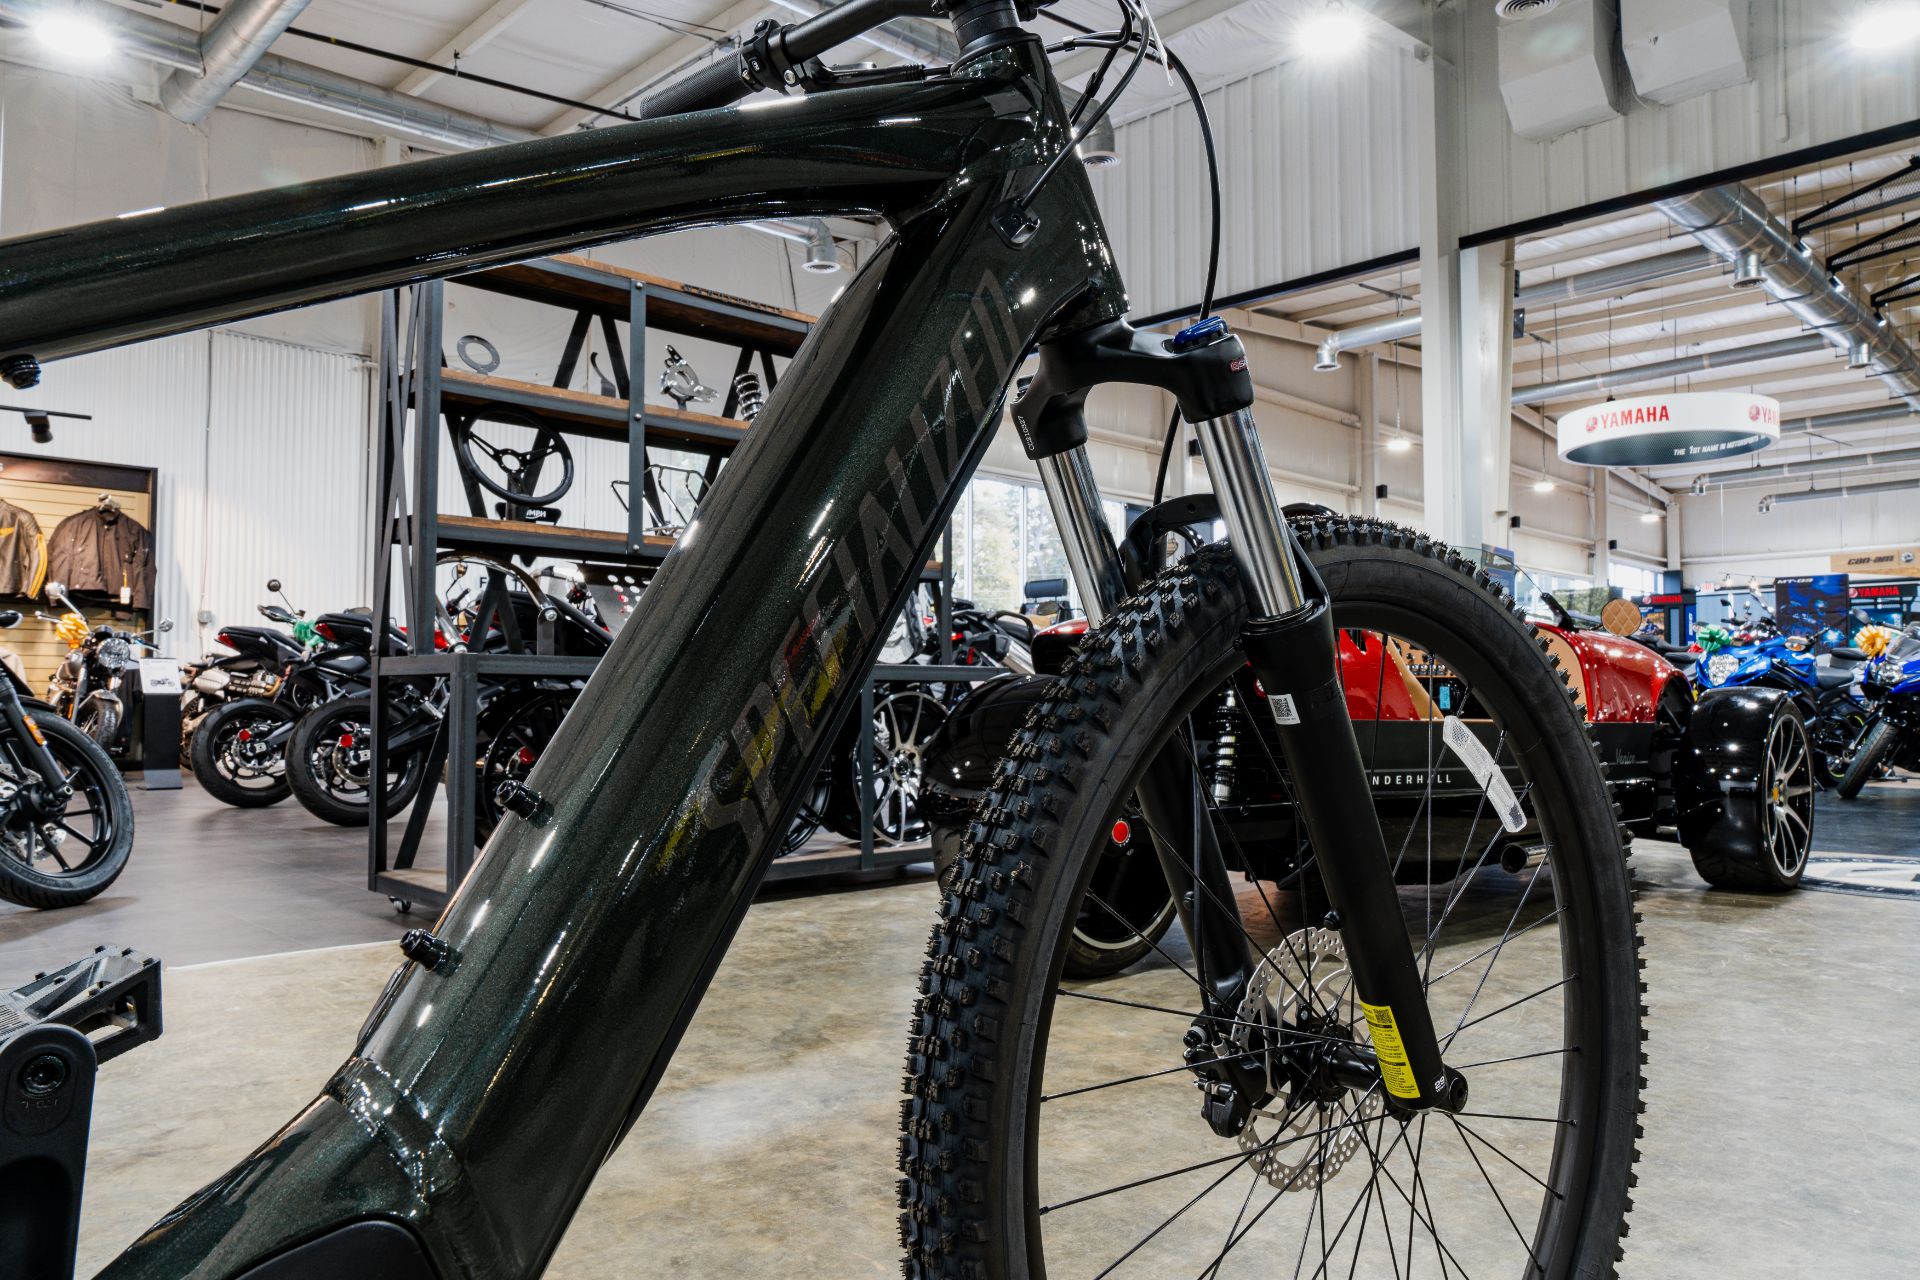 2022 Specialized Bicycle Components, Inc. TERO 3.0 in Byron, Georgia - Photo 5